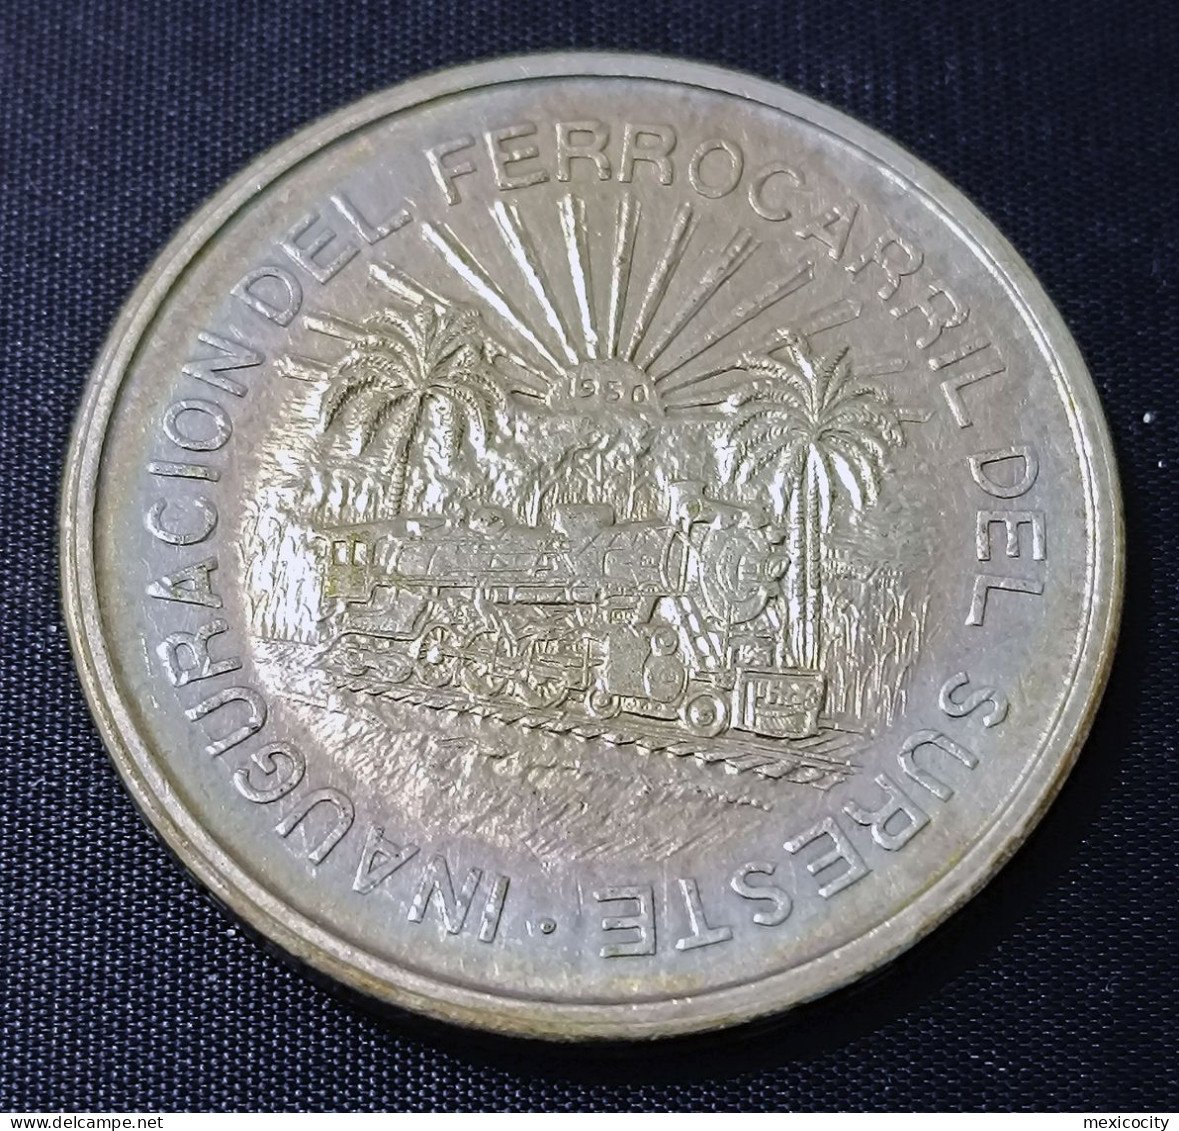 MEXICO 1950 $5 SOUTHEASTERN RAILROAD Silver Coin, See Imgs., Nice, Rather Scarce - Mexiko